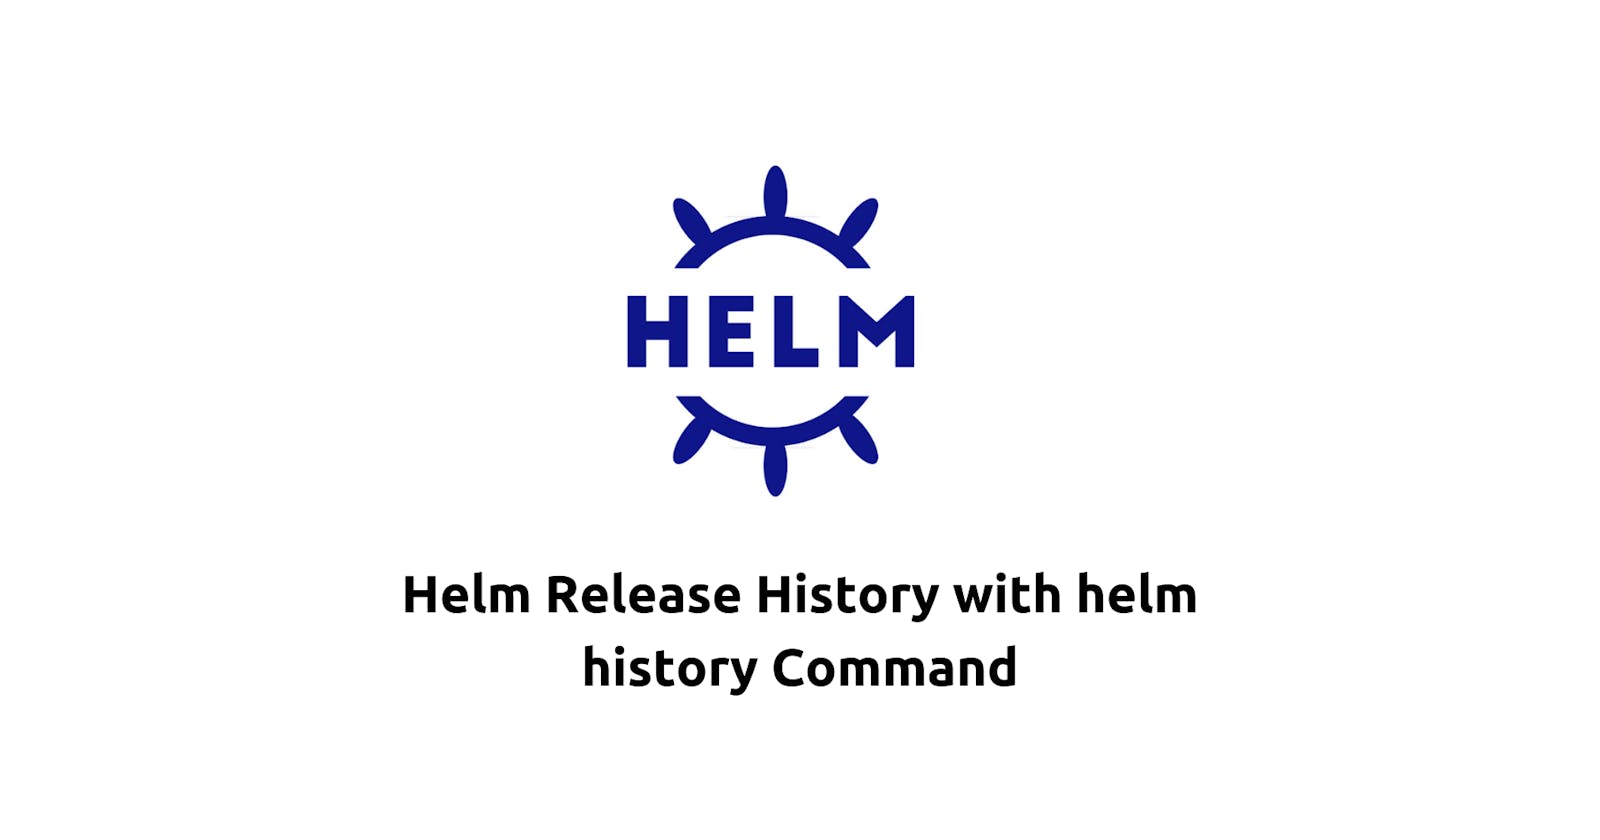 Helm Release History with helm history Command